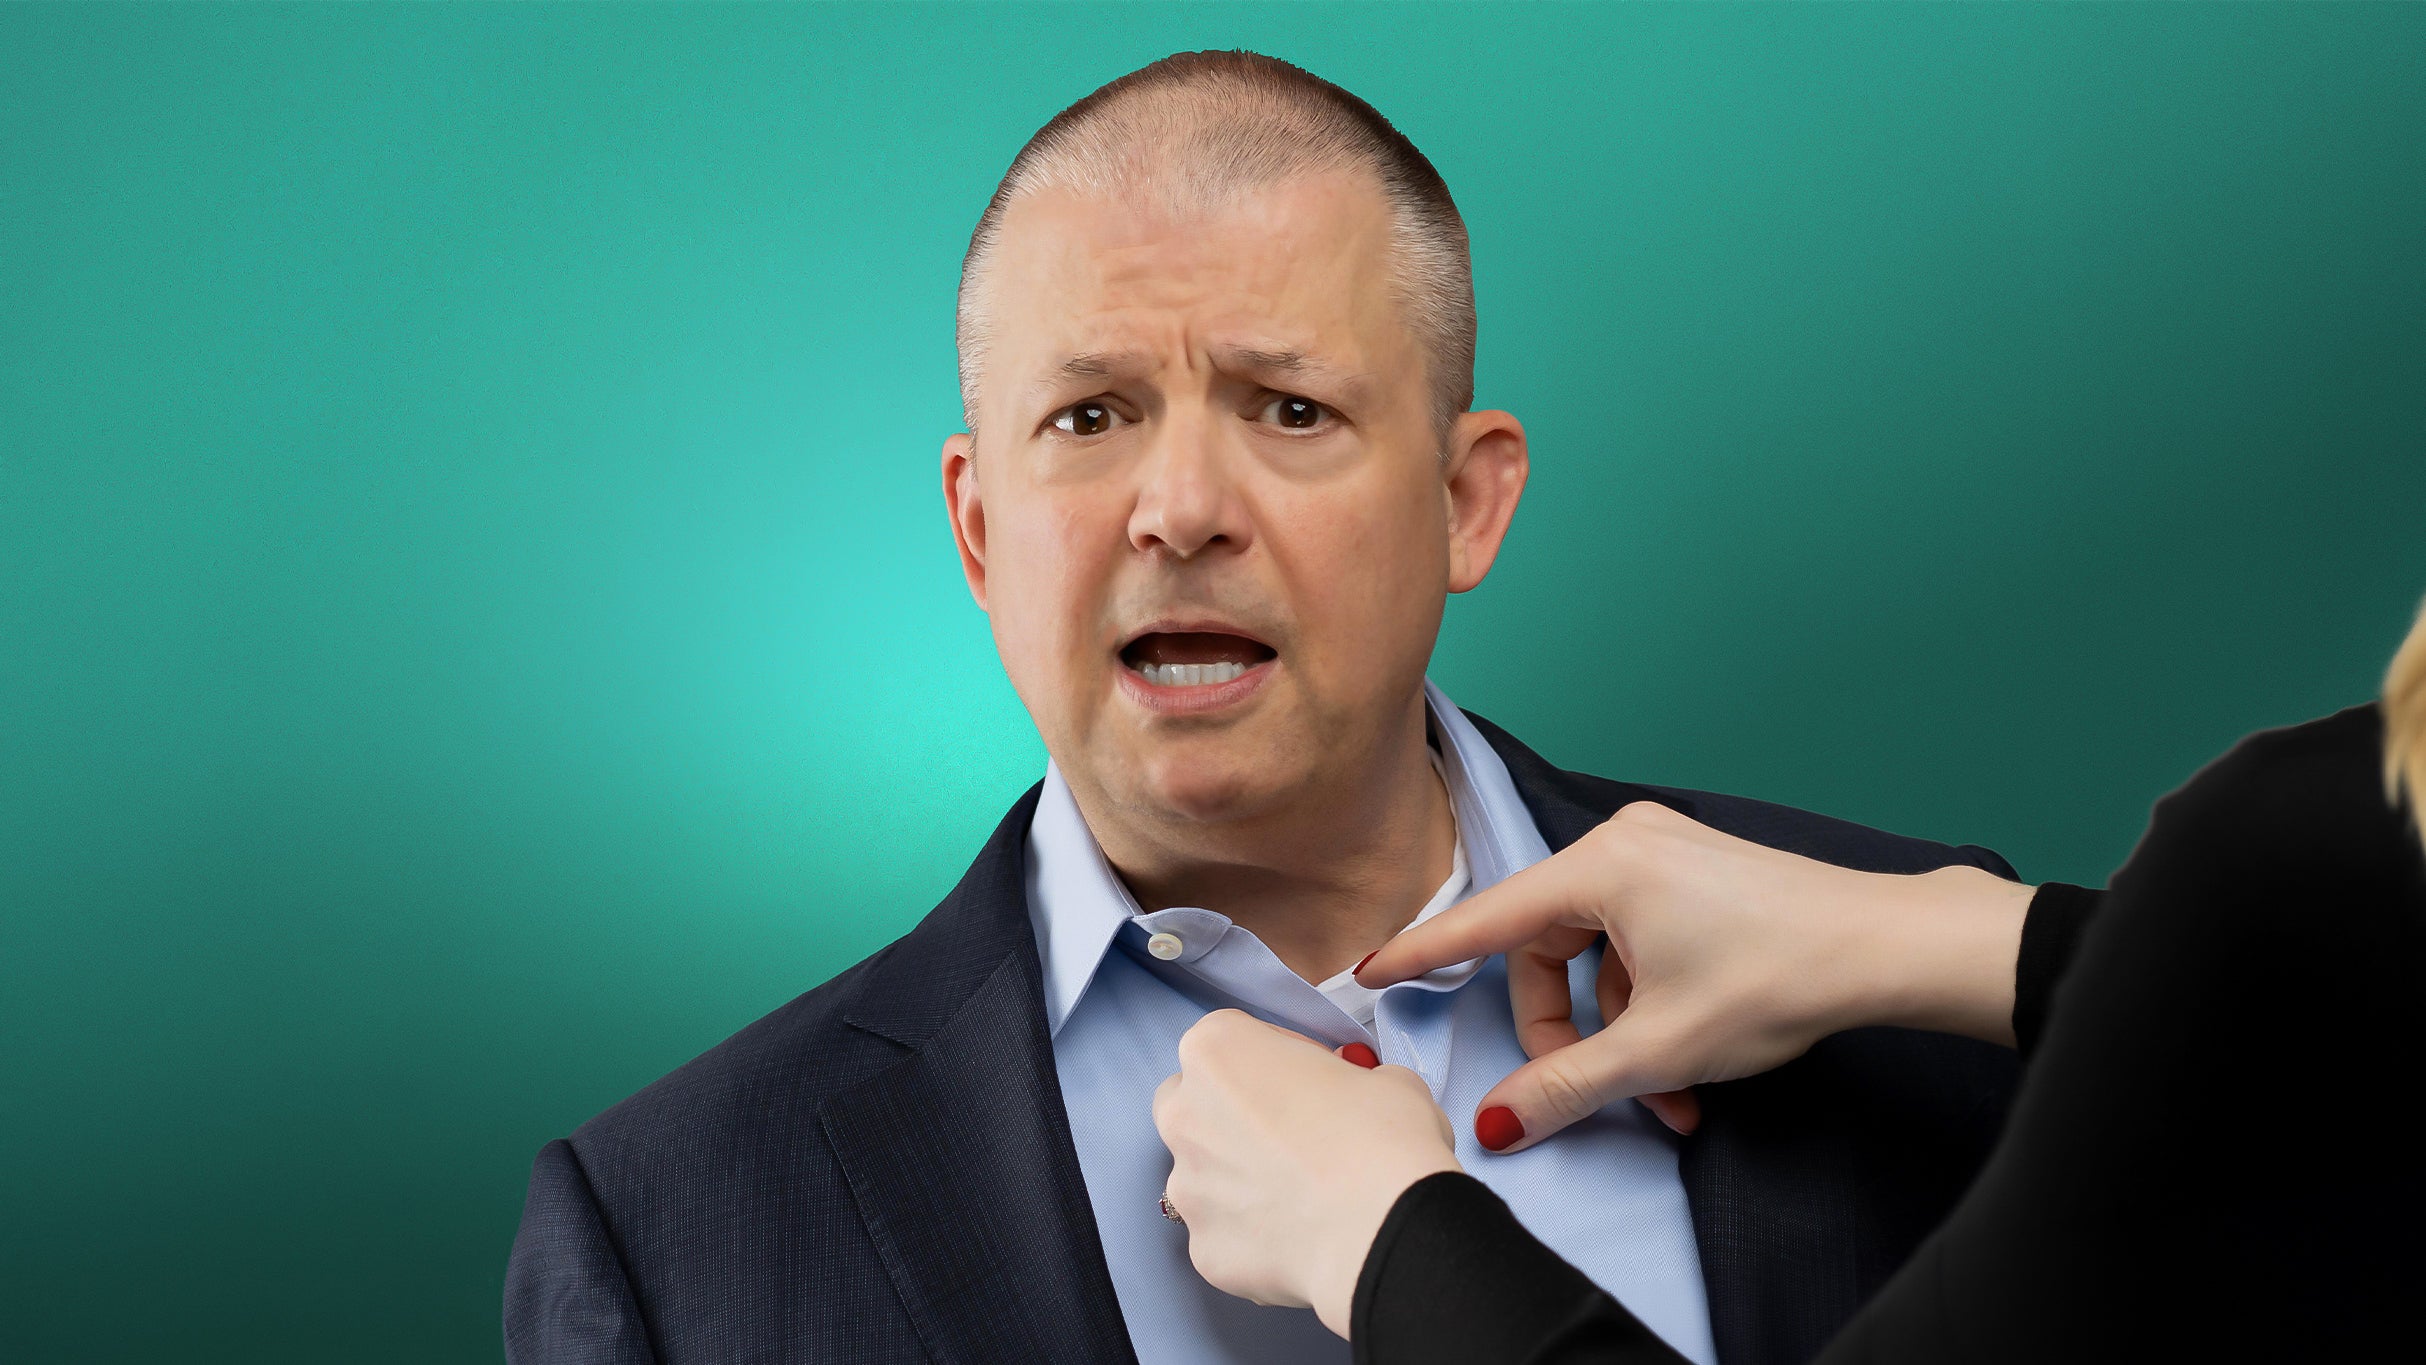 Jim Norton: Now You Know in Lexington promo photo for Artist presale offer code